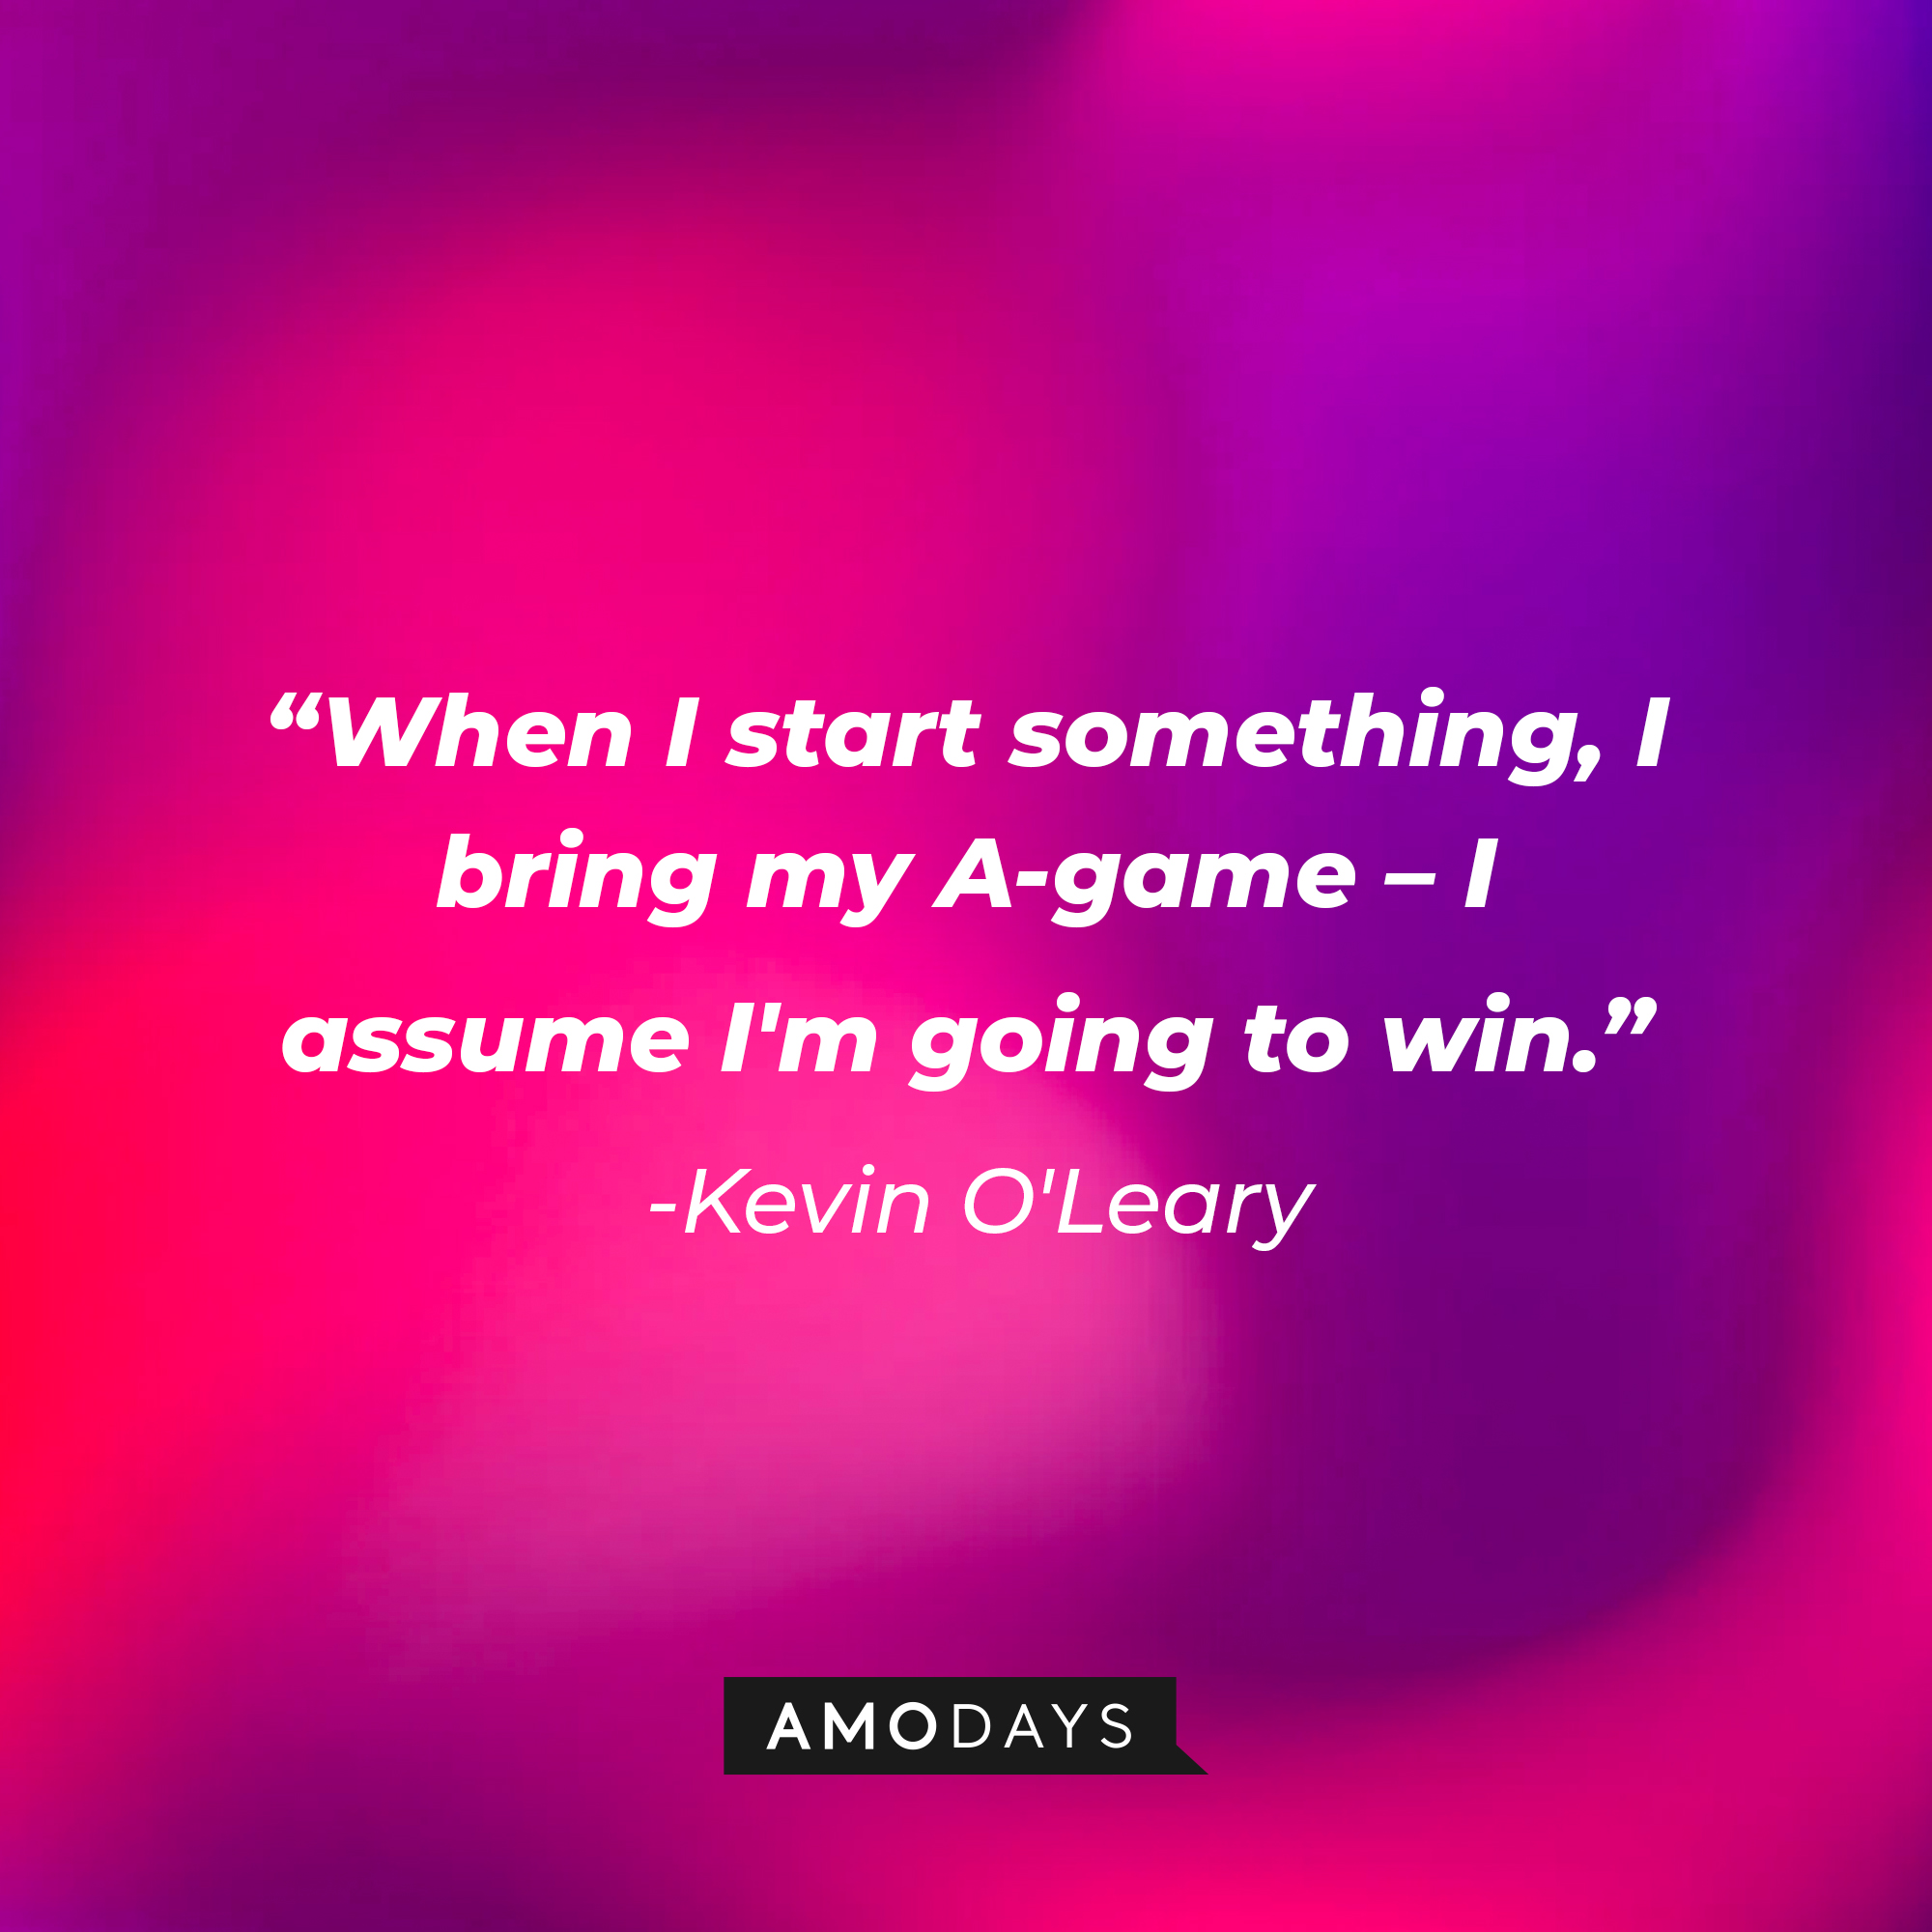 A photo with Kevin O'Leary's quote, "When I start something, I bring my A-game – I assume I'm going to win." | Source: Amodays